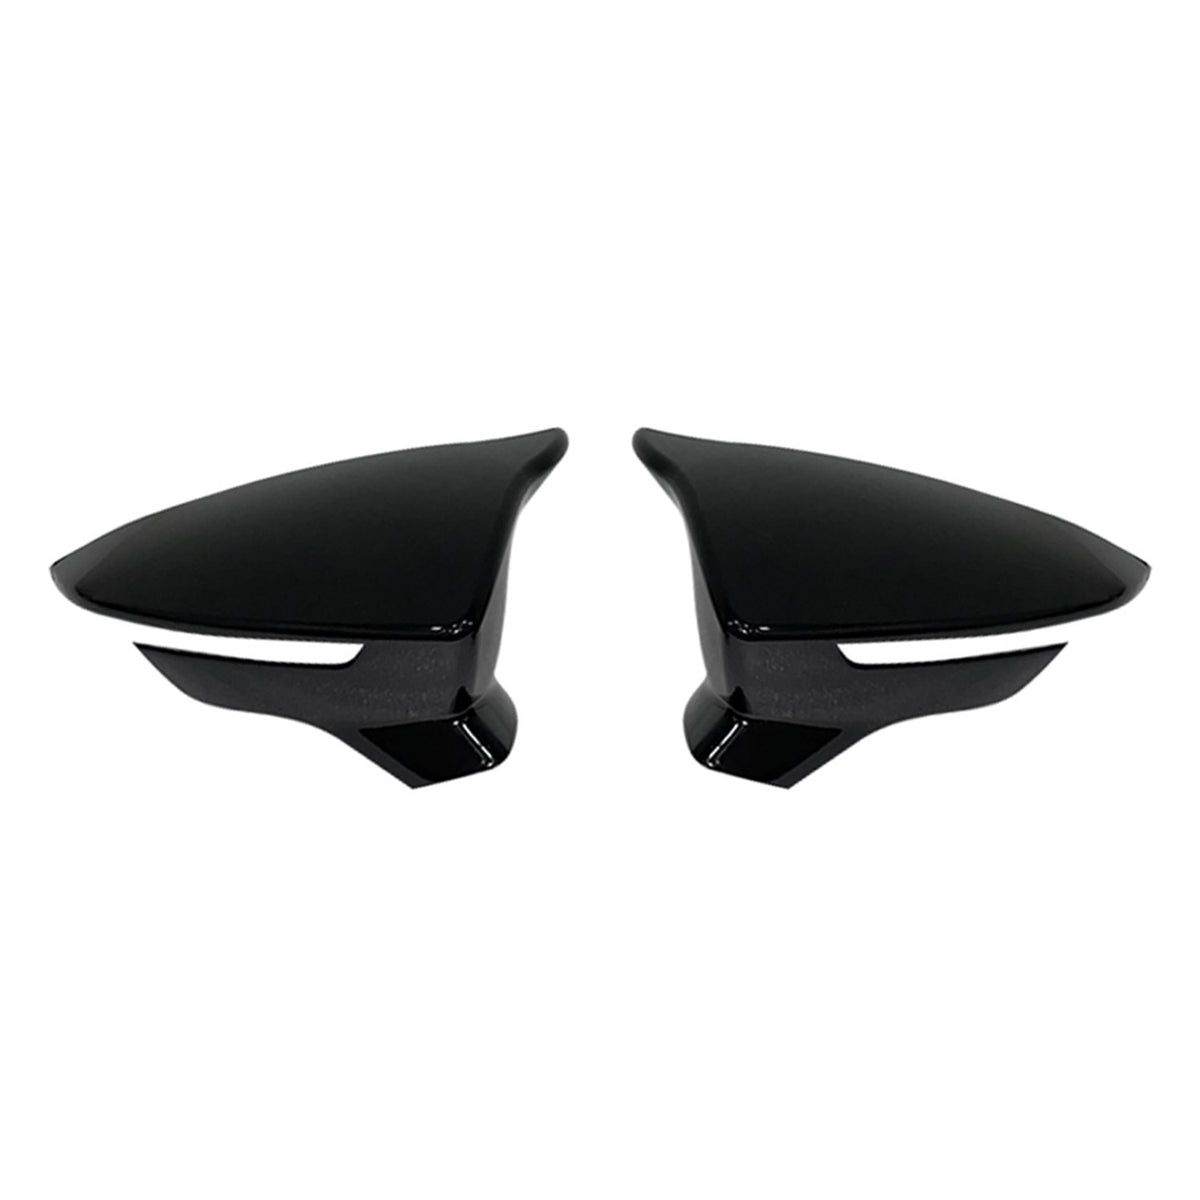 Mirror caps mirror cover for Seat Leon 2012-2019 ABS black gloss 2 pieces